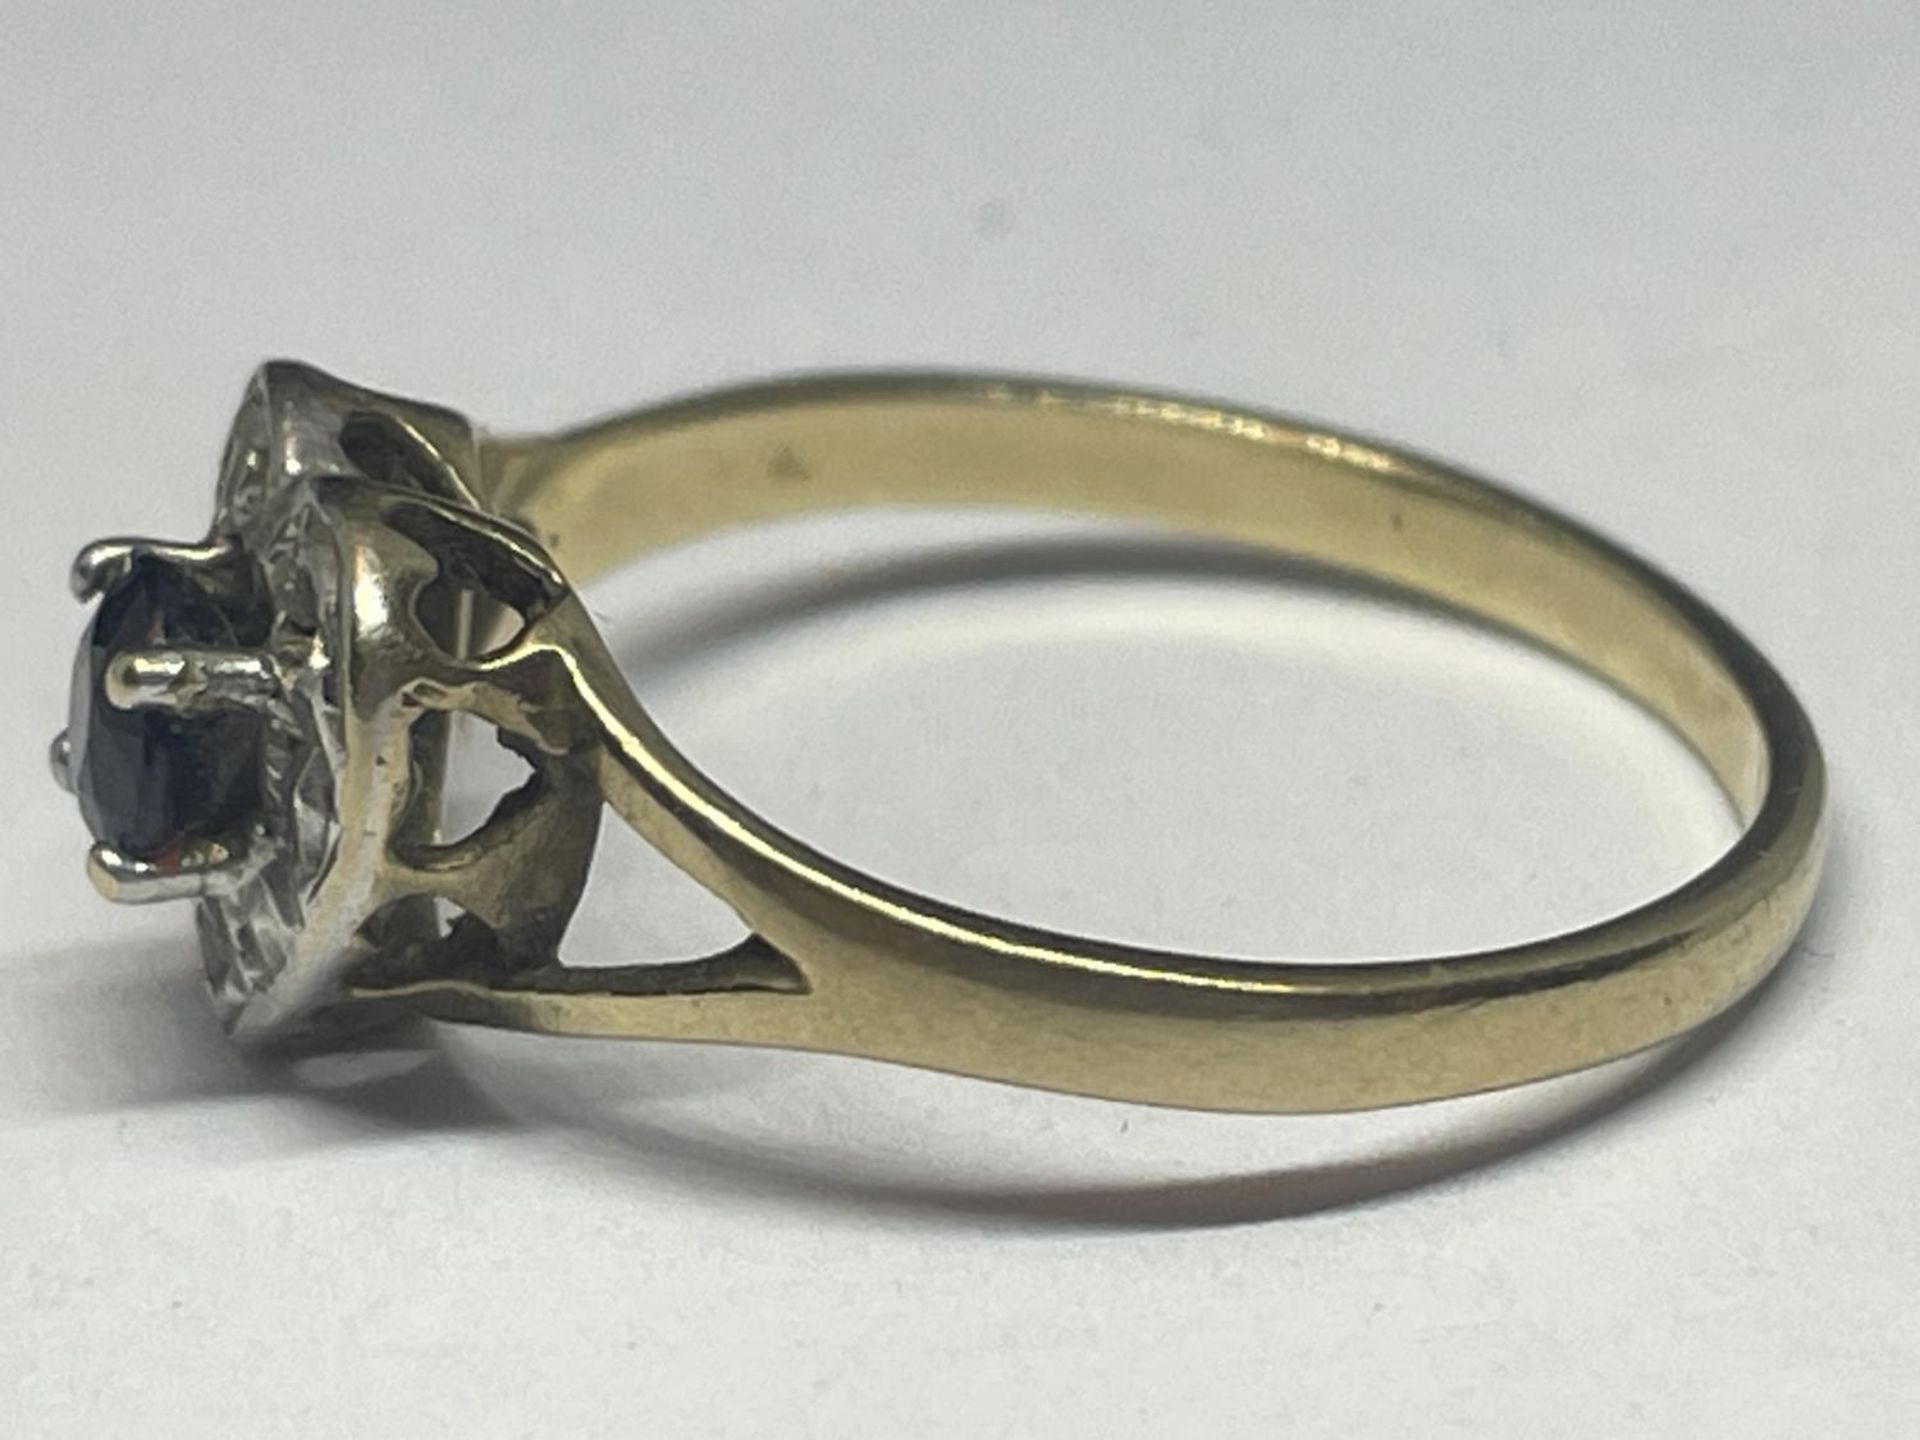 A 9 CARAT GOLD RING WITH A CENTRE SAPPHIRE SURROUNDED BY DIAMONDS IN A HEART SHAPE SIZE M - Image 2 of 3